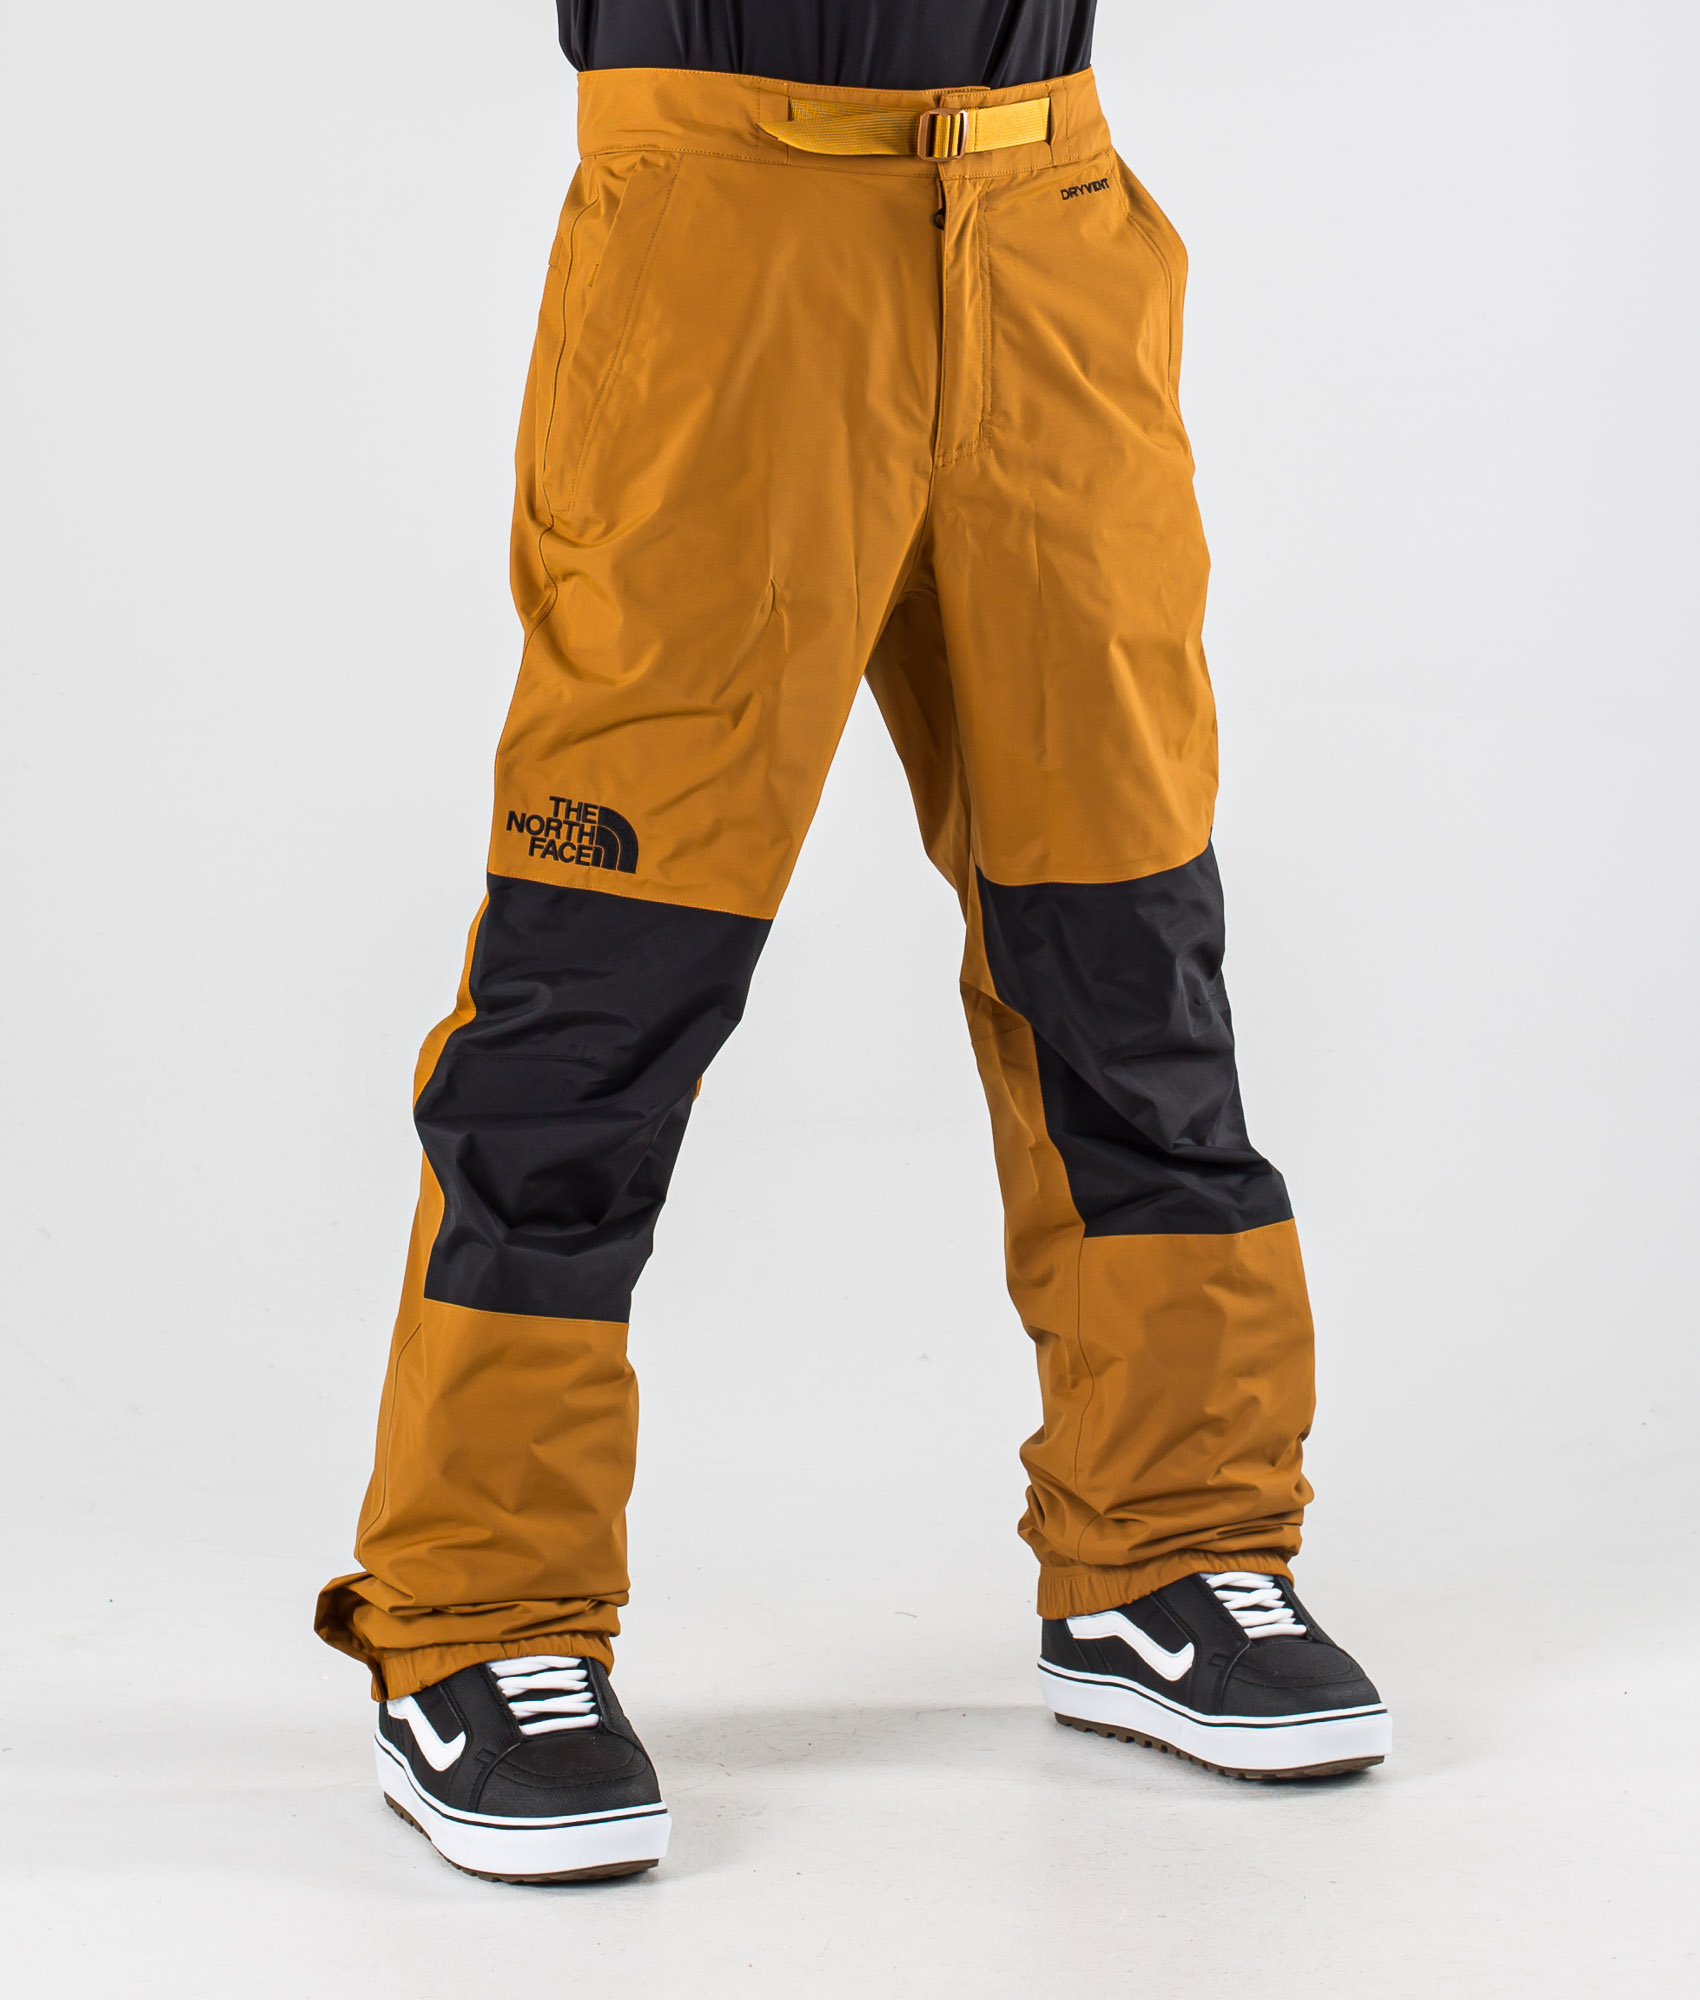 The North Face Up \u0026 Over Snowboard 